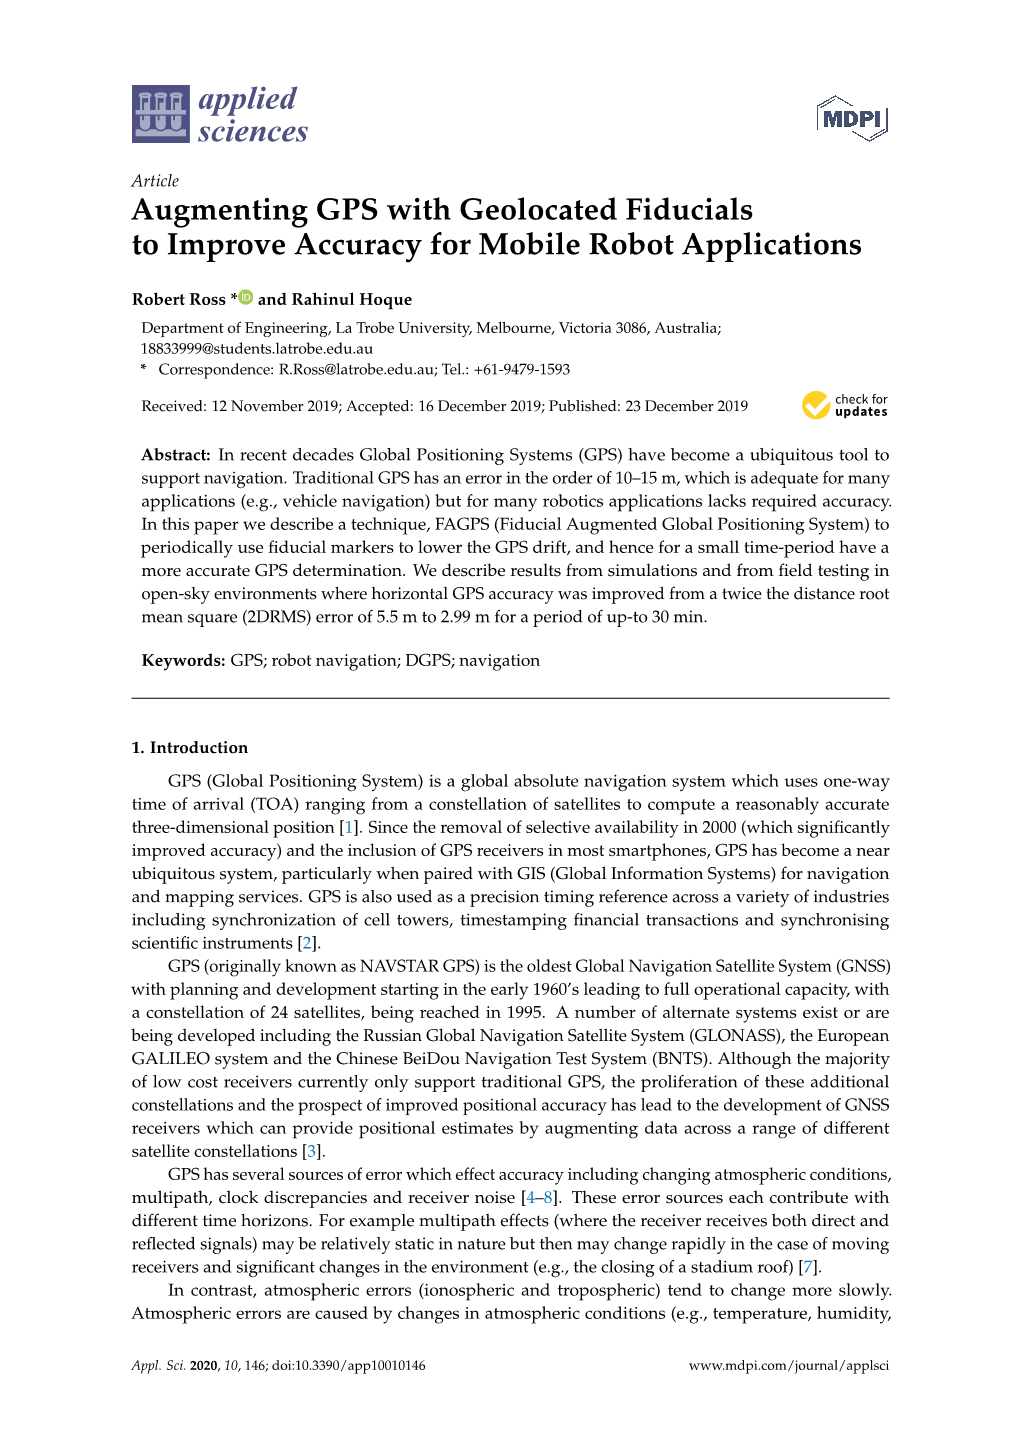 Augmenting GPS with Geolocated Fiducials to Improve Accuracy for Mobile Robot Applications